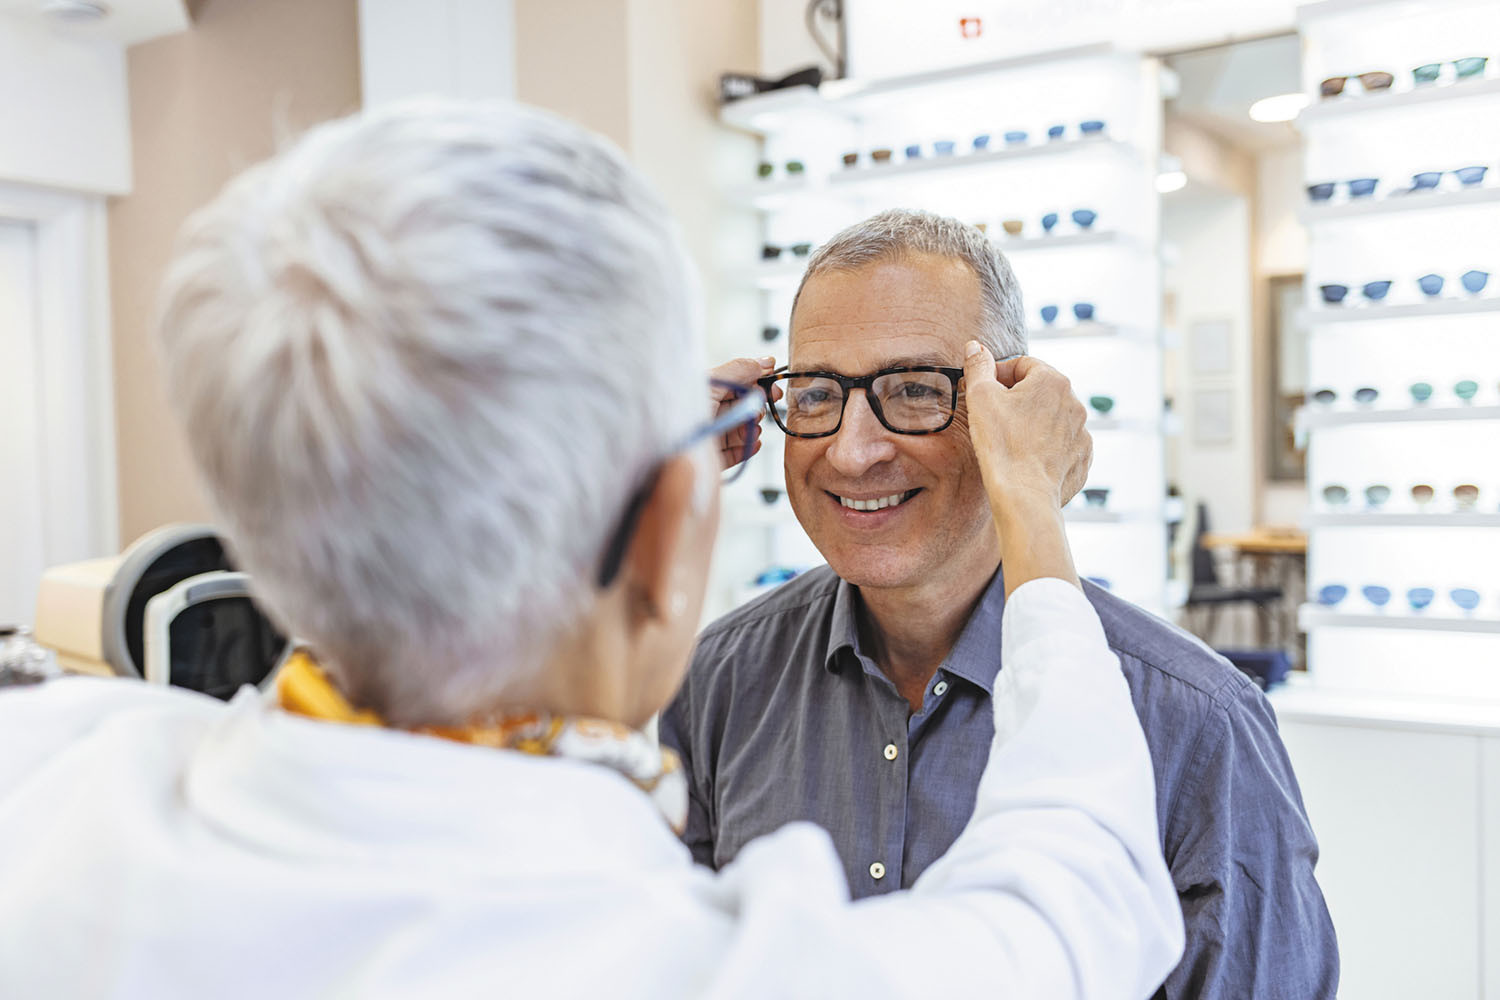 photo of a man smiling as he is being fitted for eyeglasses in an optical shop